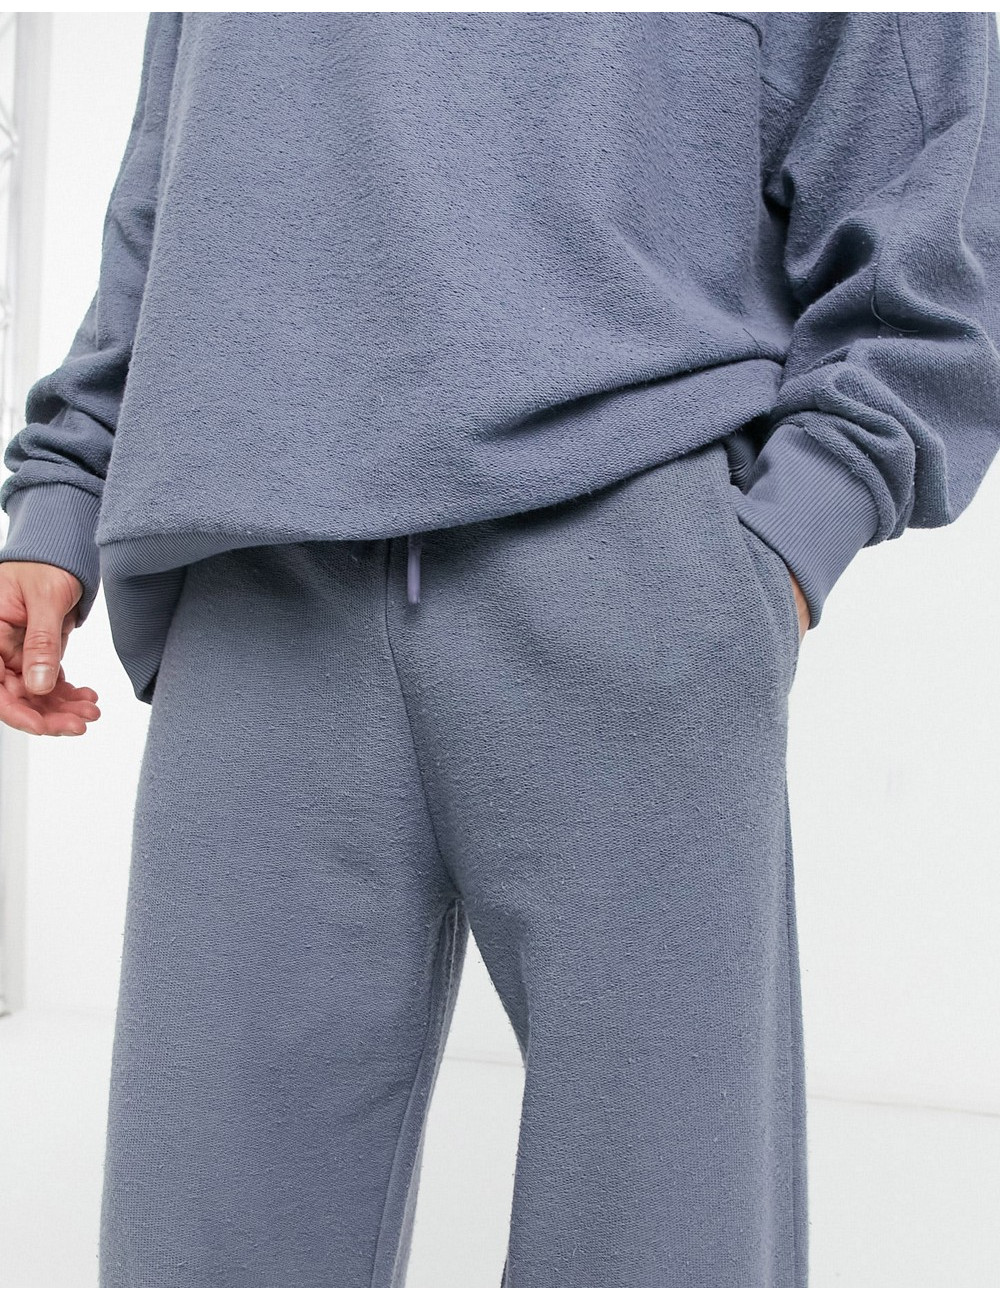 COLLUSION oversized joggers...